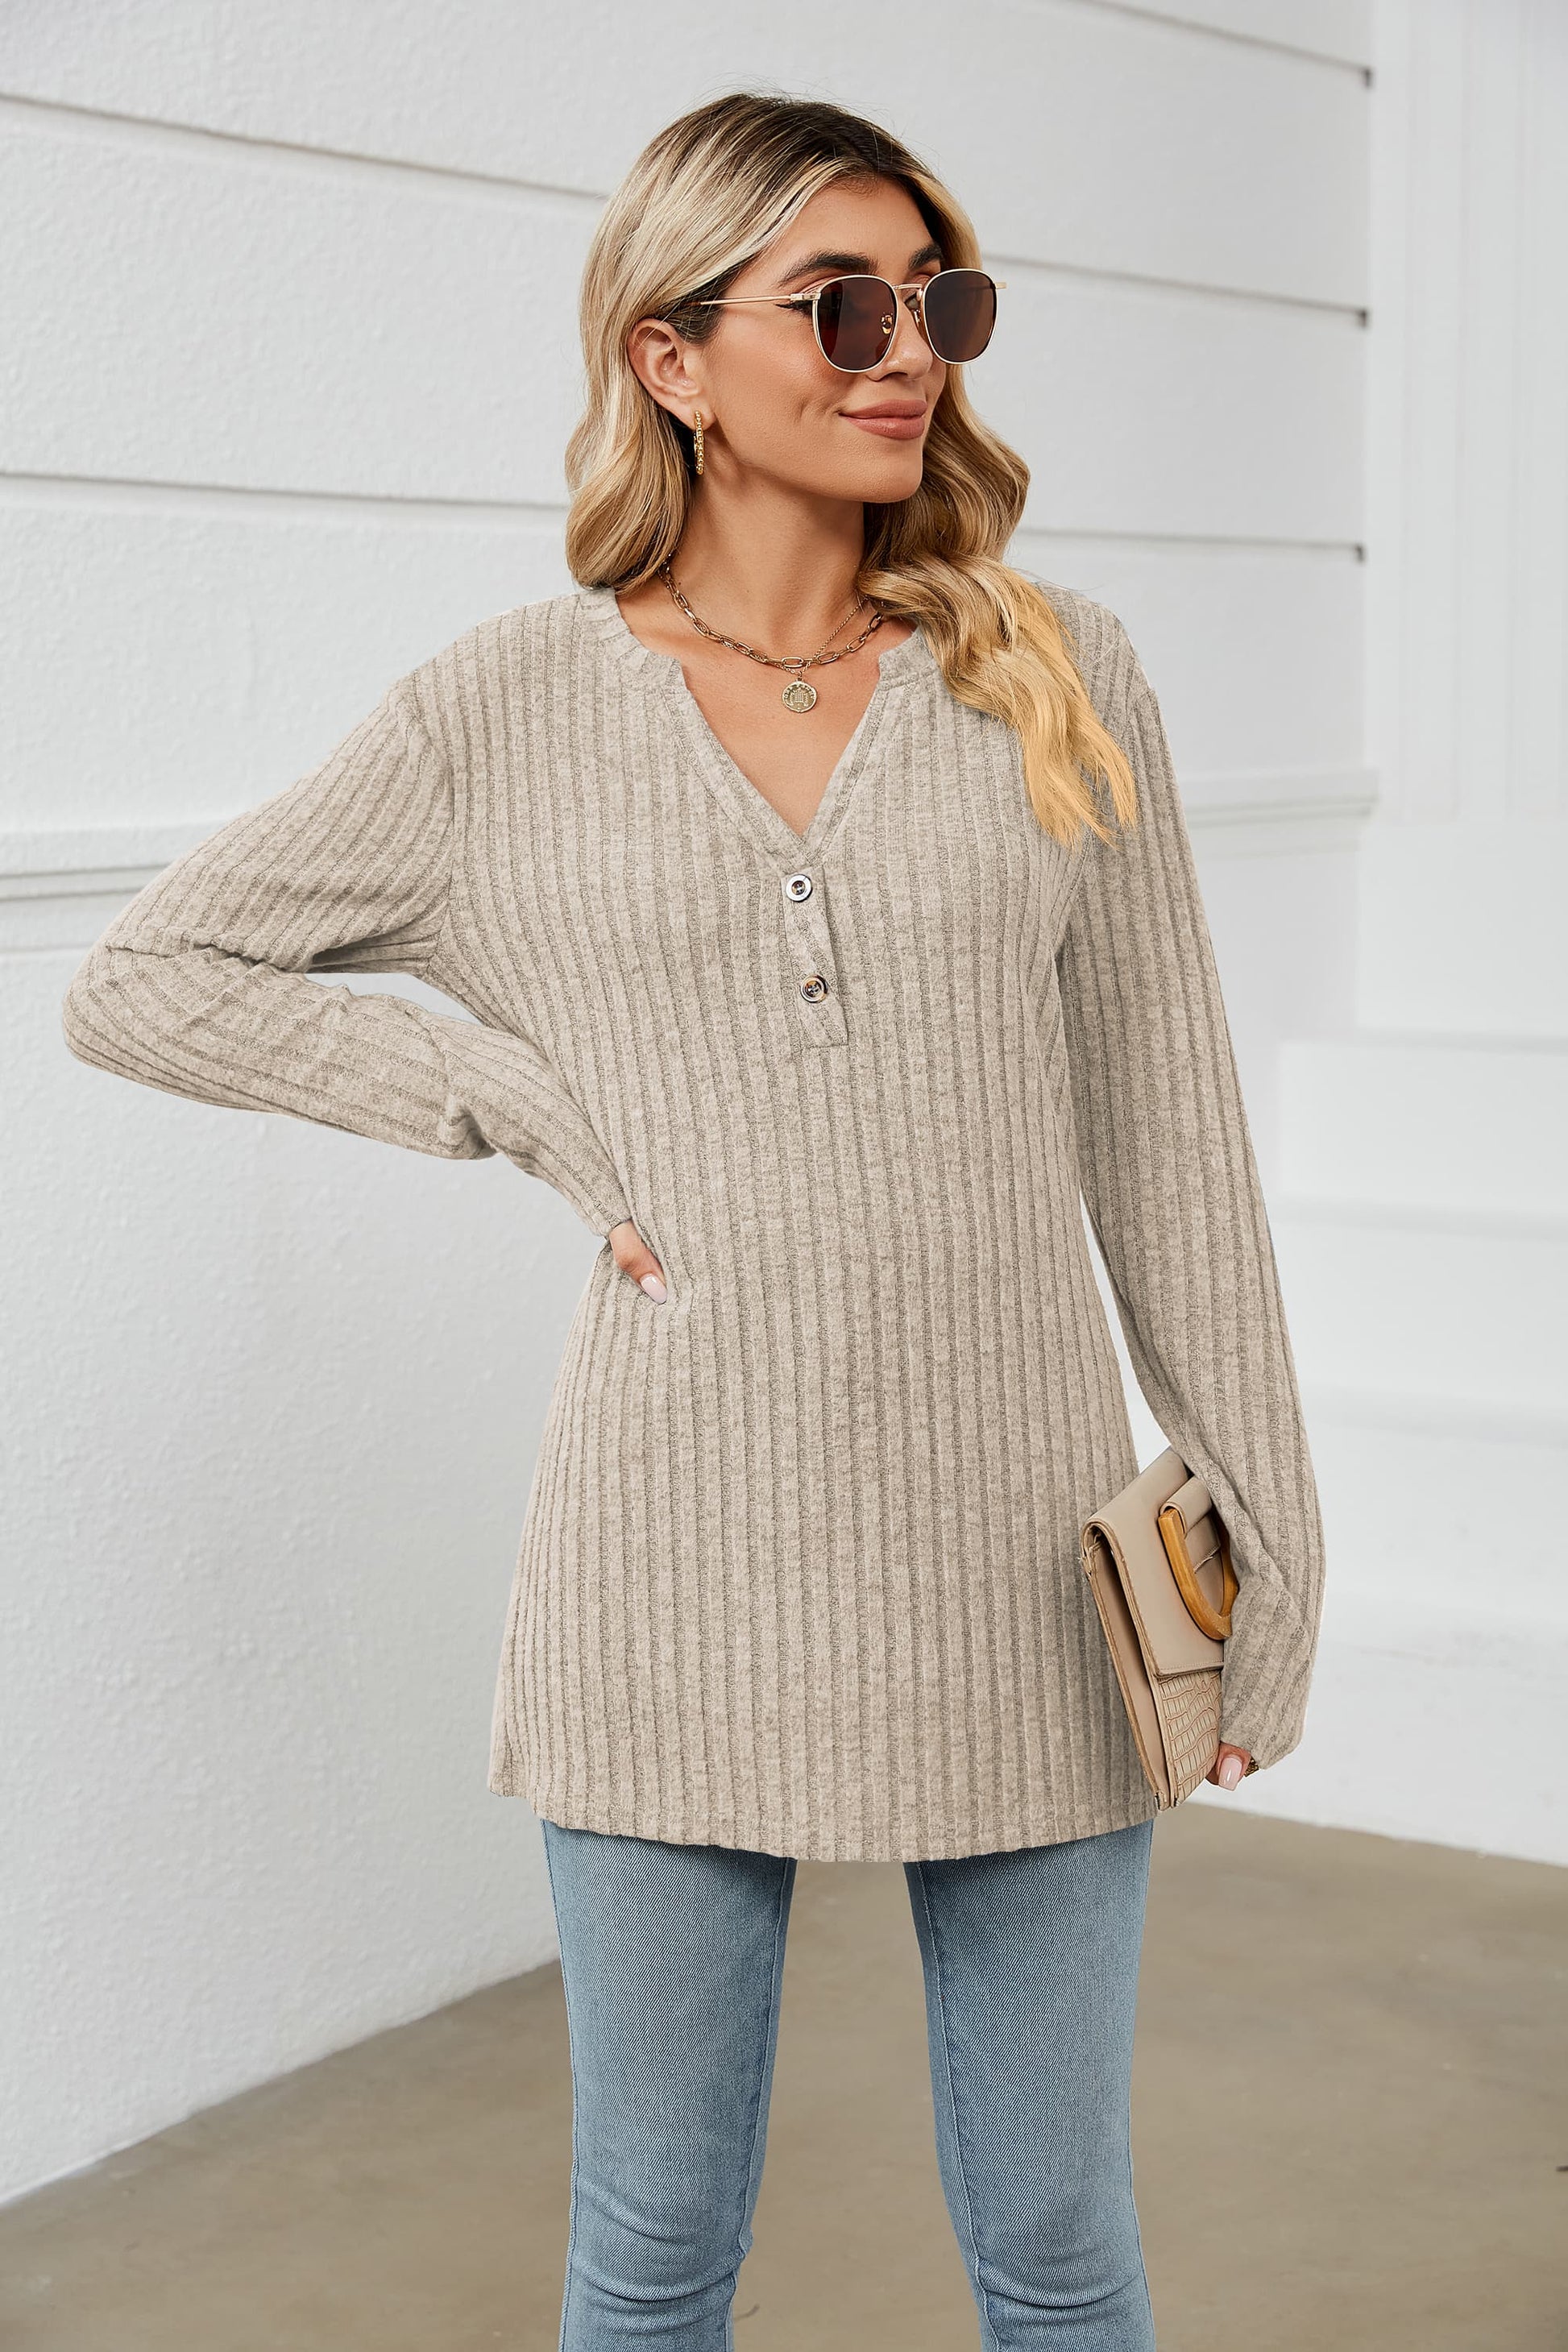 Notched Neck Ribbed Long Sleeve T-Shirt - Beige / S - T-Shirts - Shirts & Tops - 16 - 2024